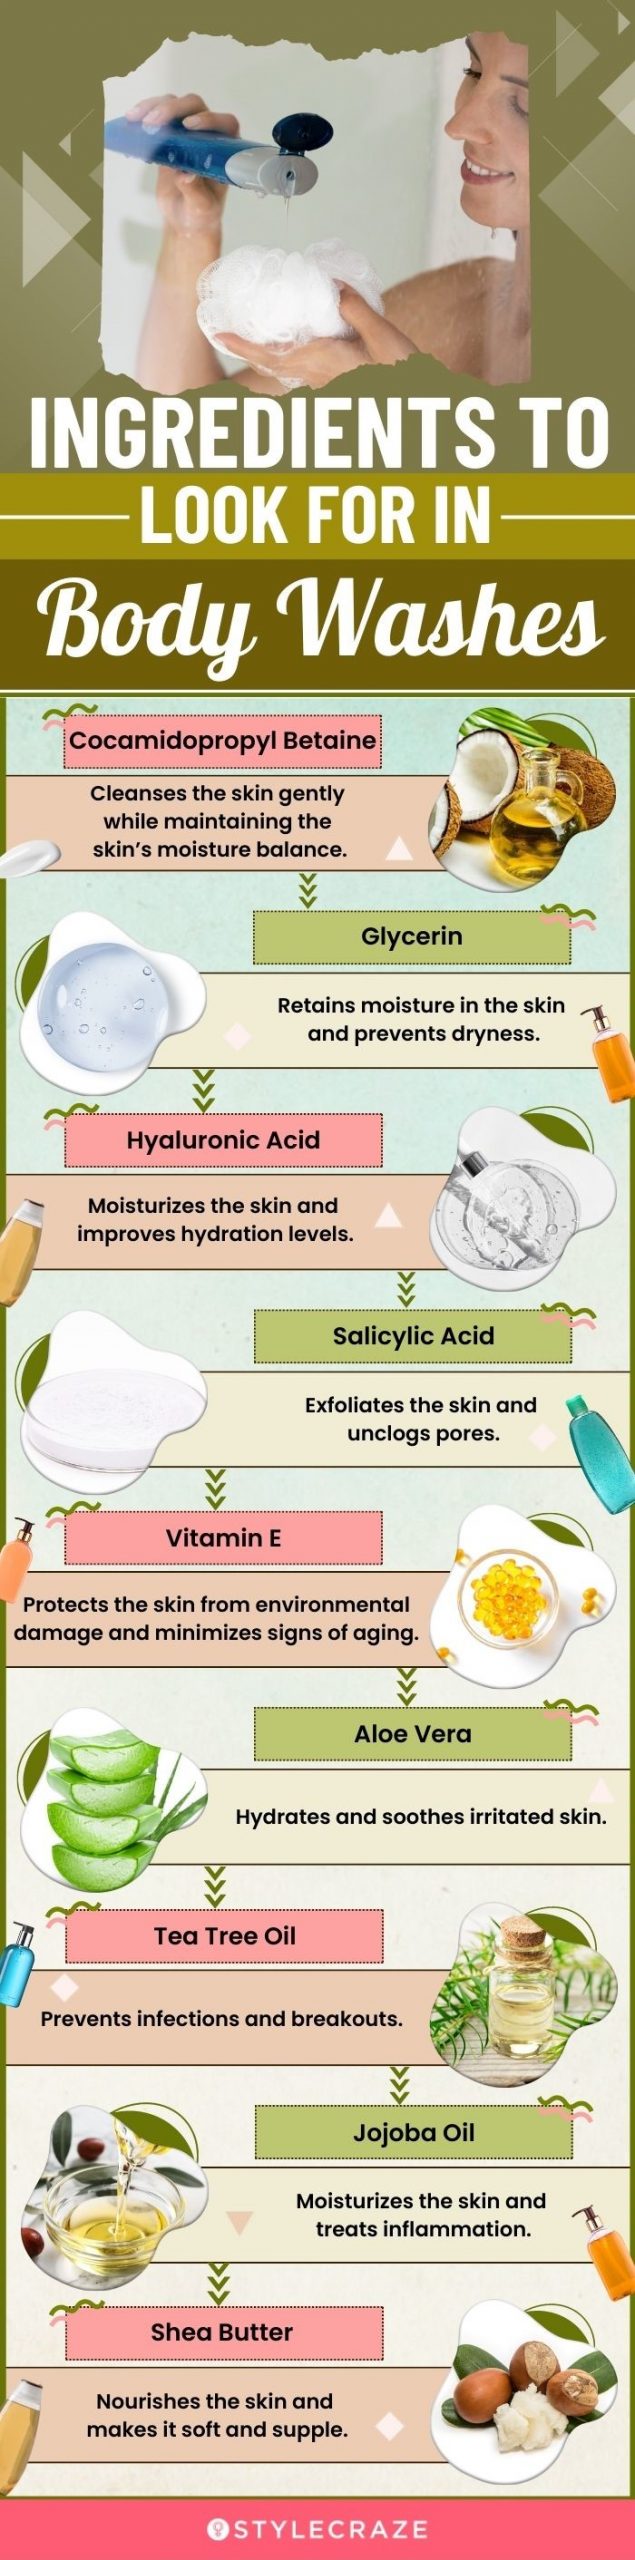 Ingredients To Look For In Body Washes (infographic)